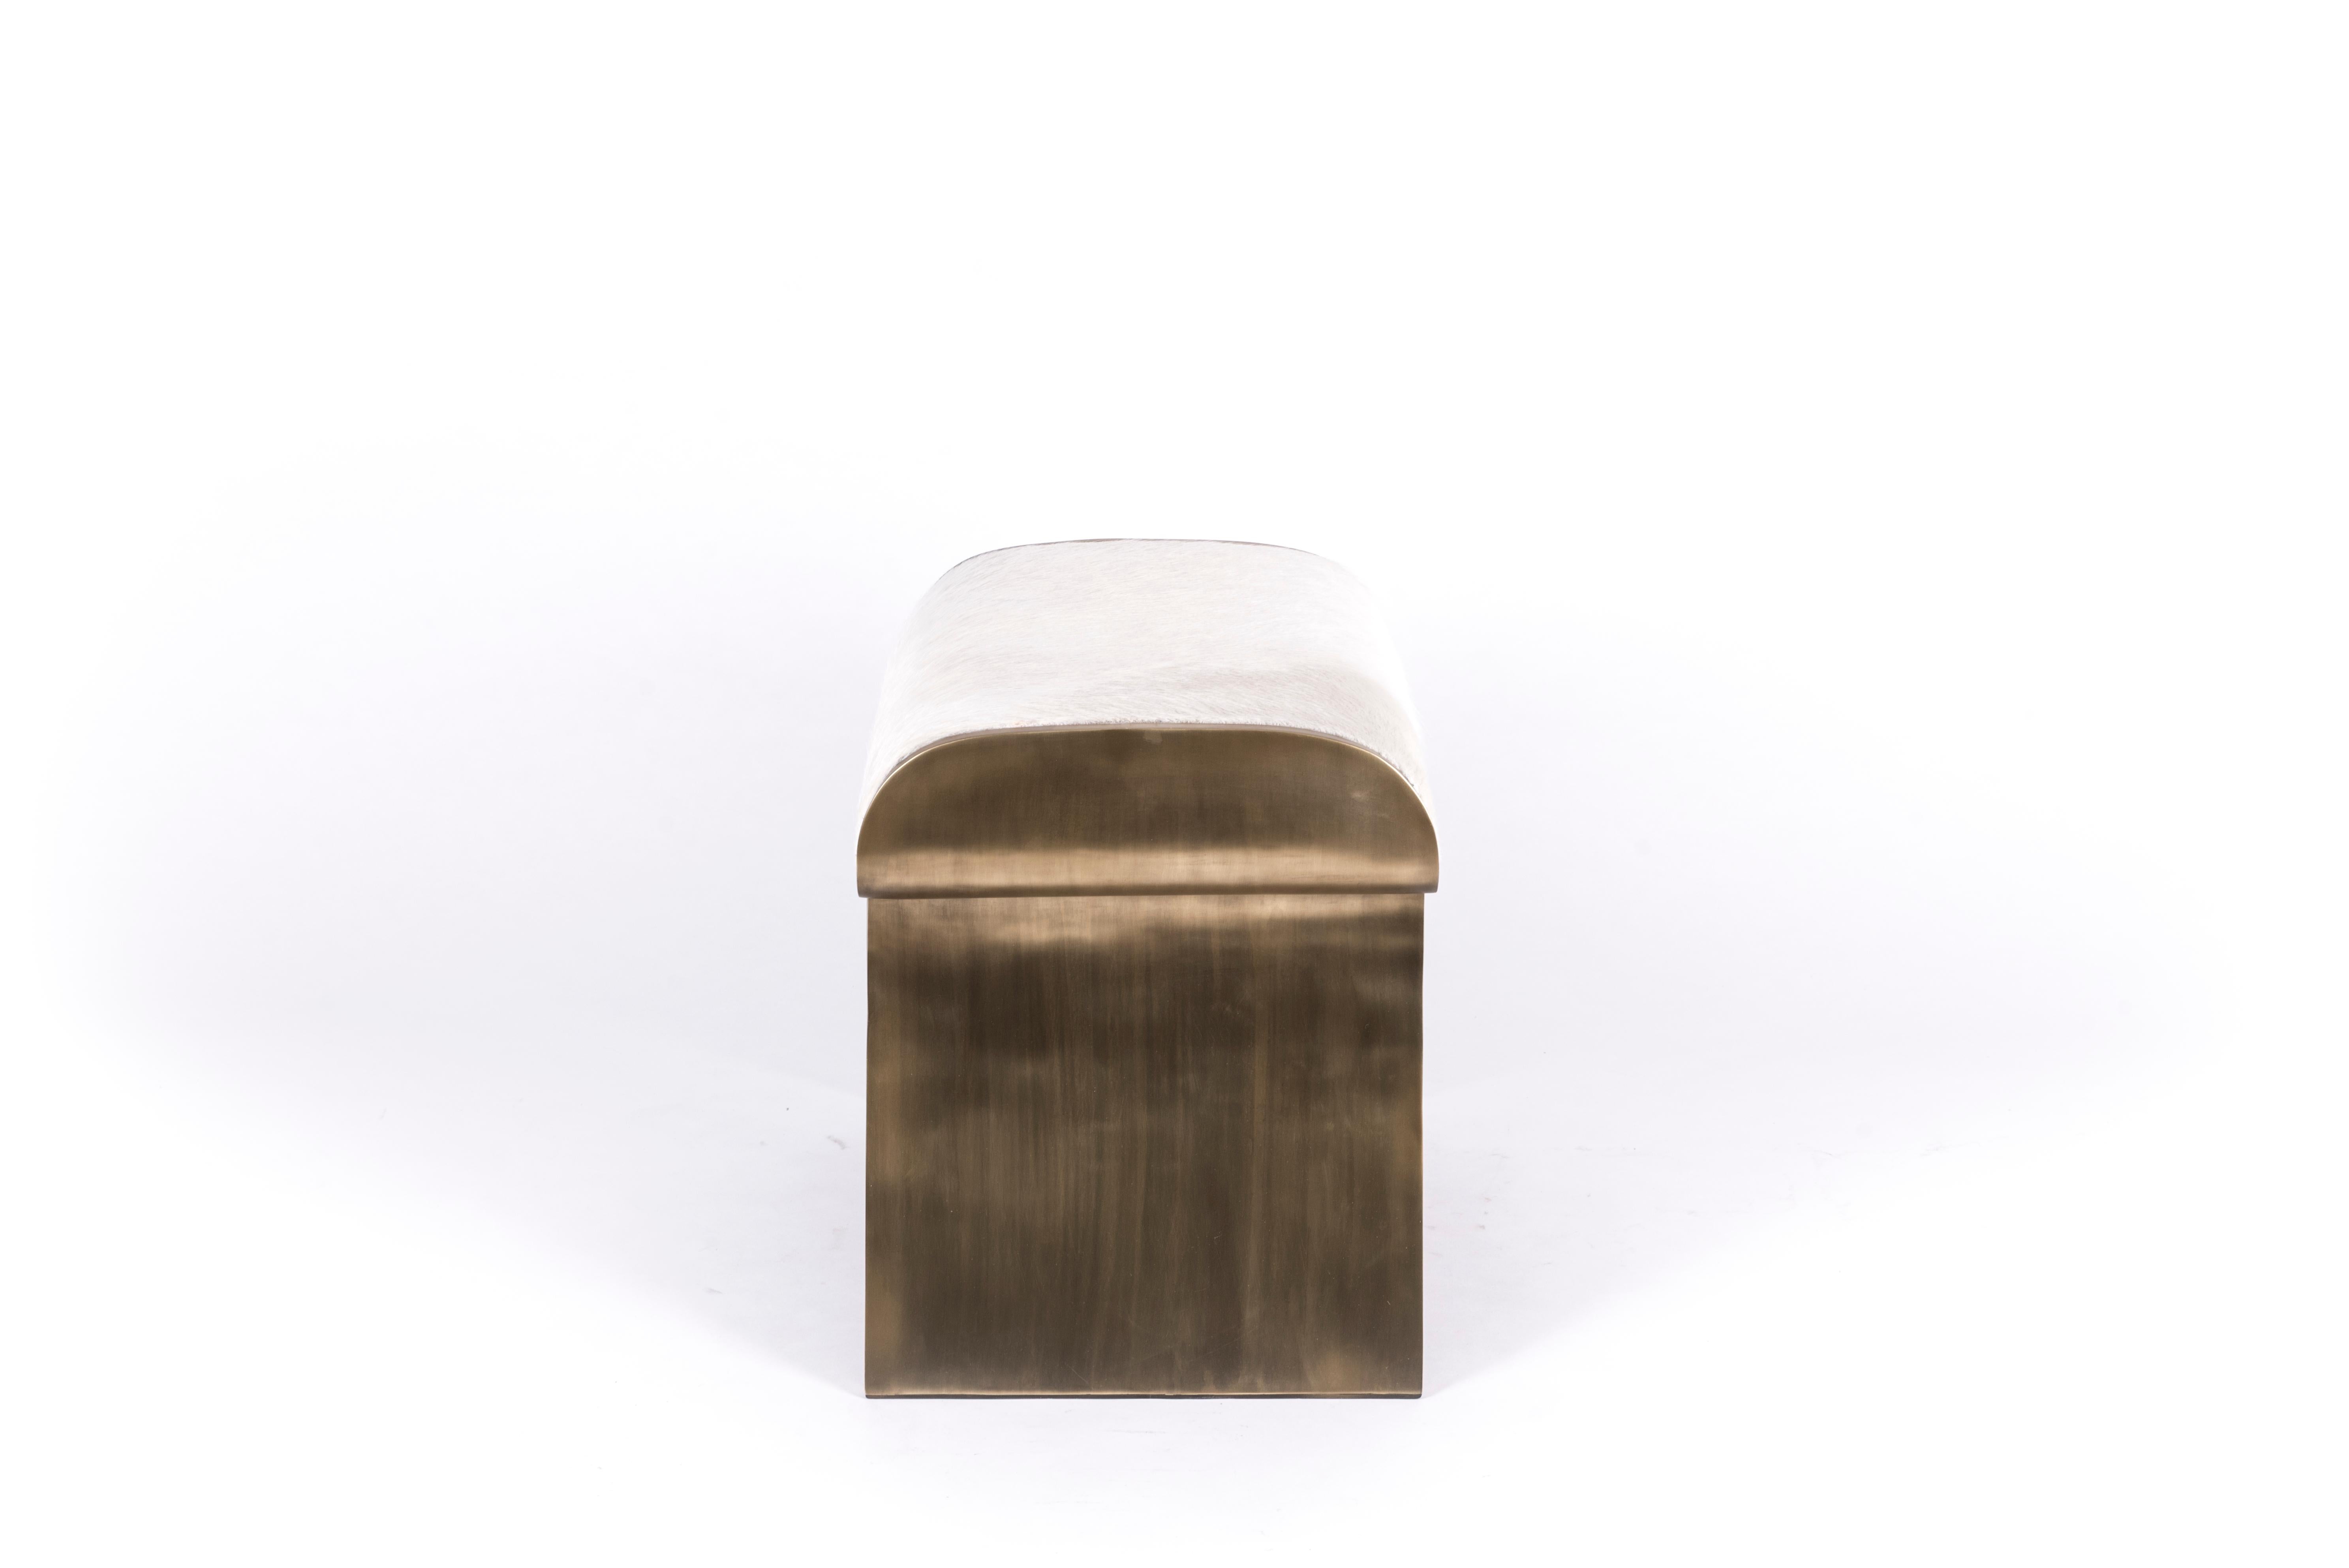 Hand-Crafted Dandy Stool in Mink Shagreen and Bronze-Patina Brass by Kifu, Paris For Sale